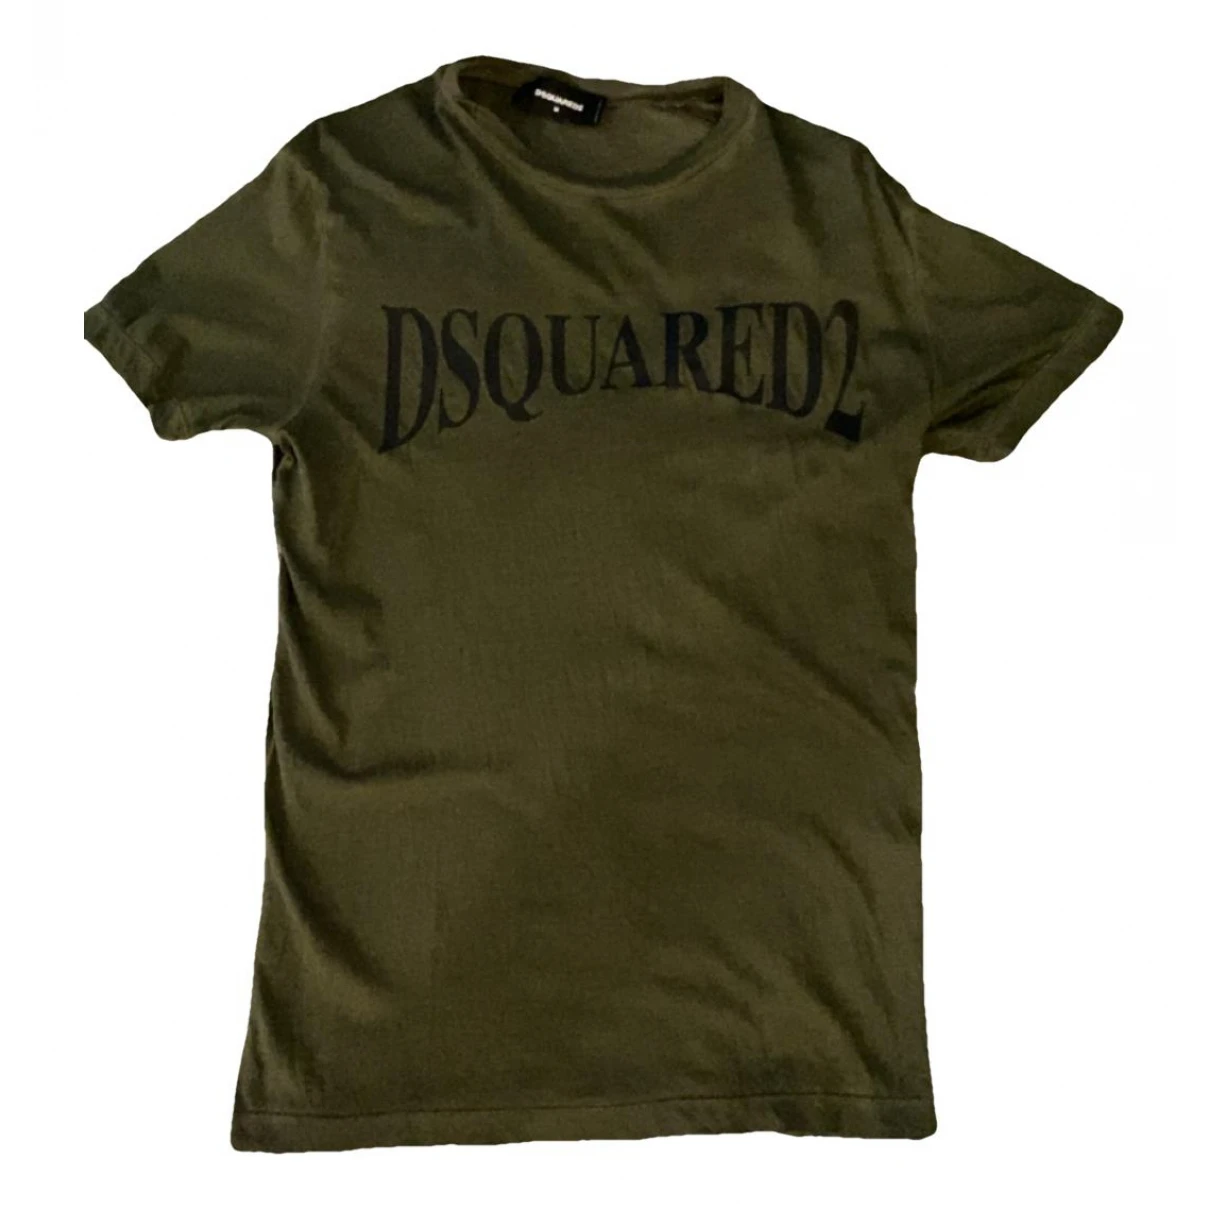 clothing Dsquared2 t-shirts for Male Cotton M International. Used condition